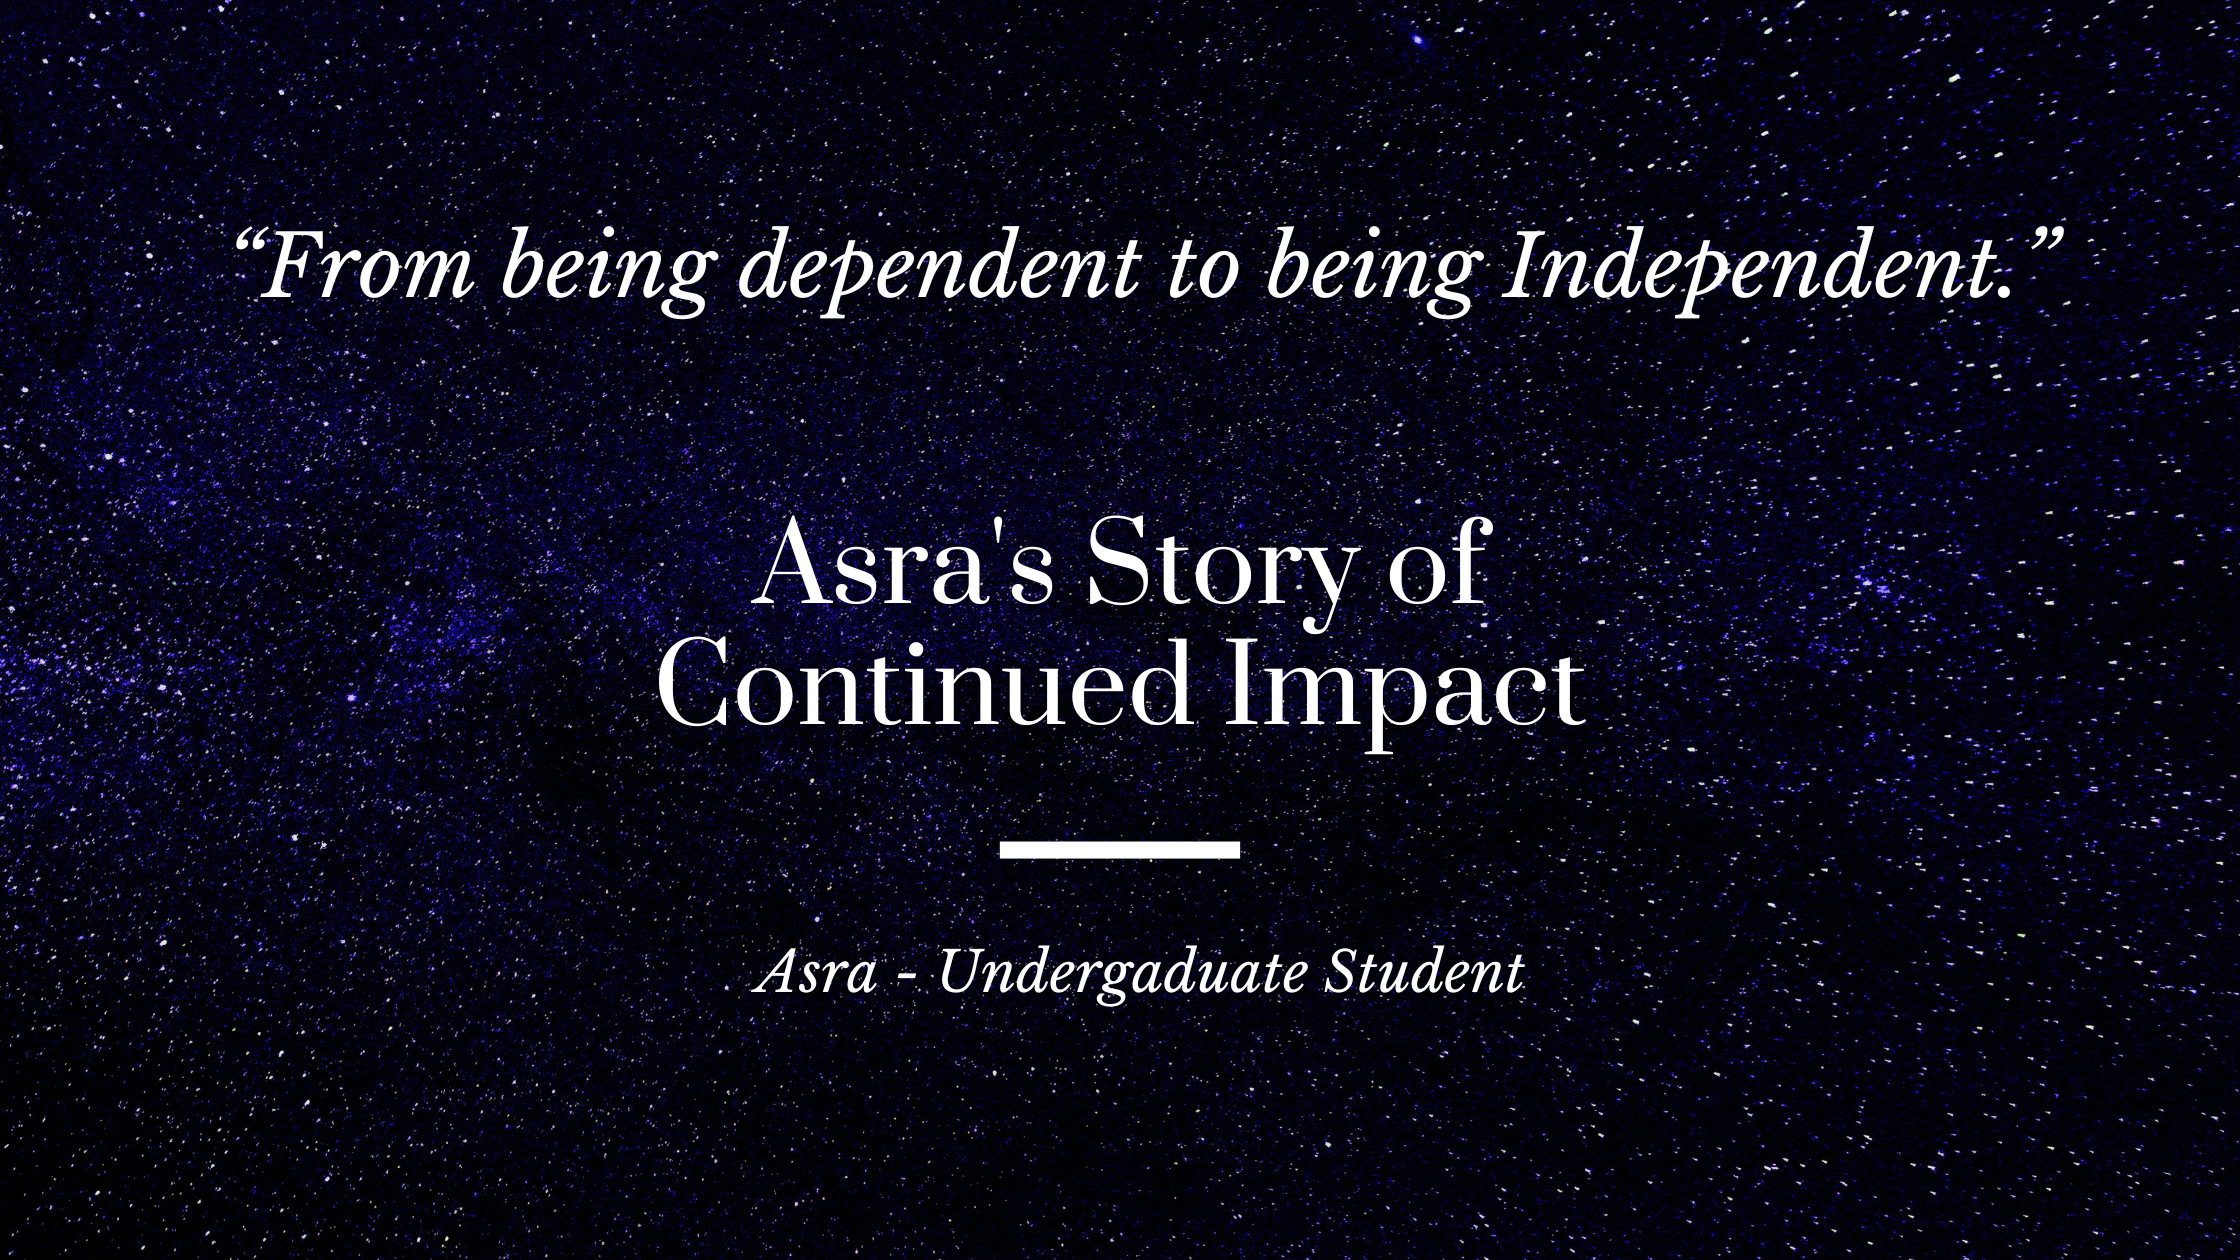 Asra’s Story of Continued Impact